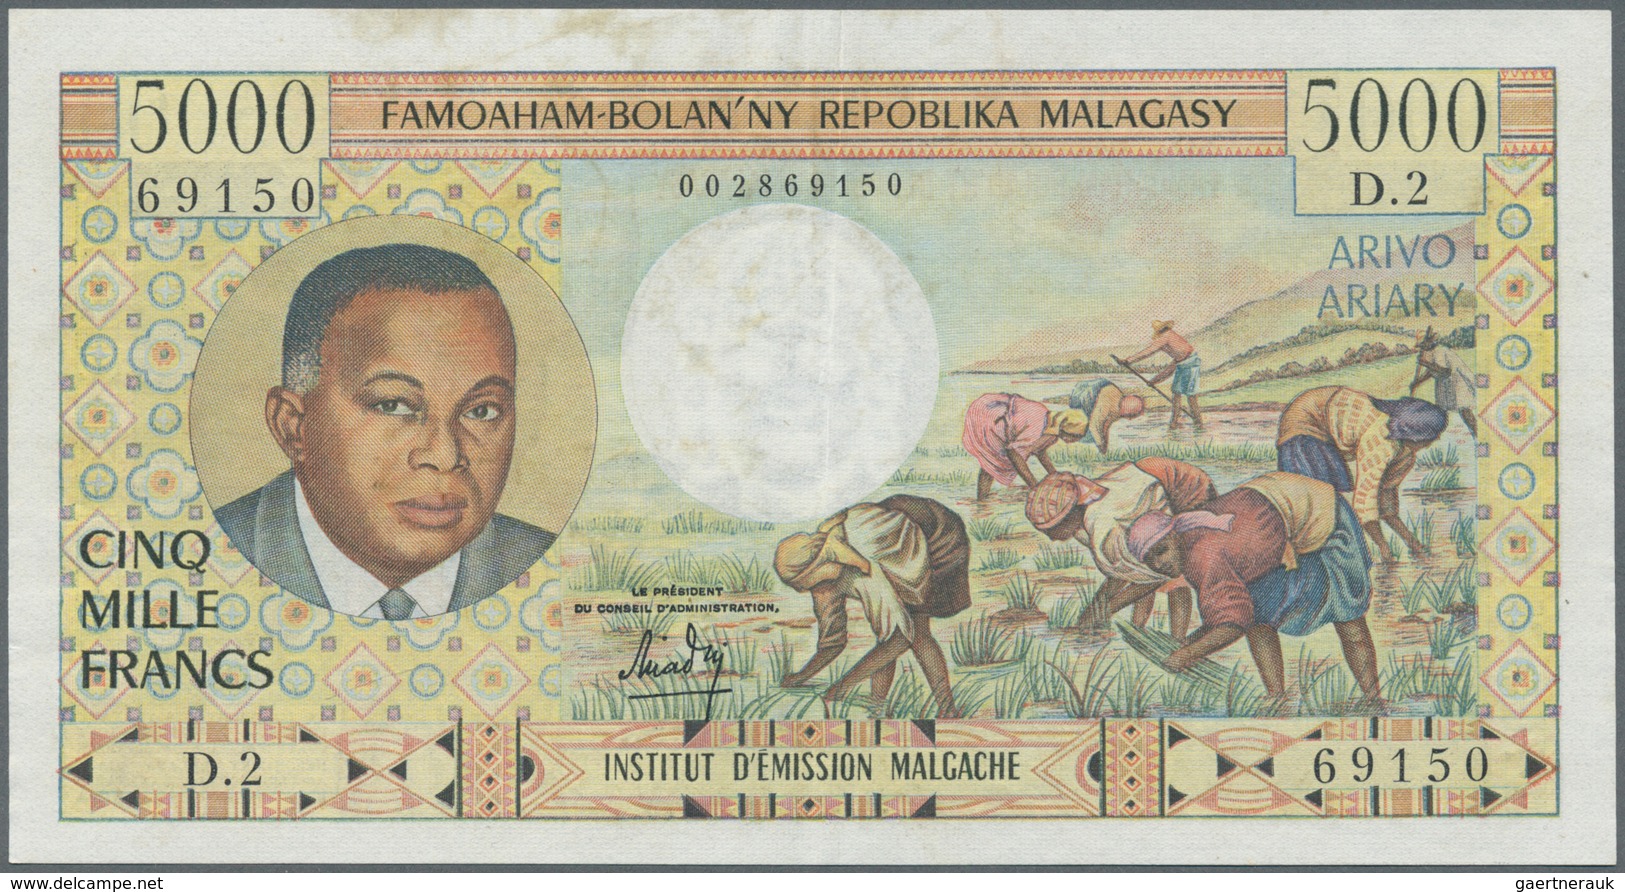 02942 Africa / Afrika: Collectors book with 126 Banknotes from Madagascar, Malawi, Mauritius, Mauritania,